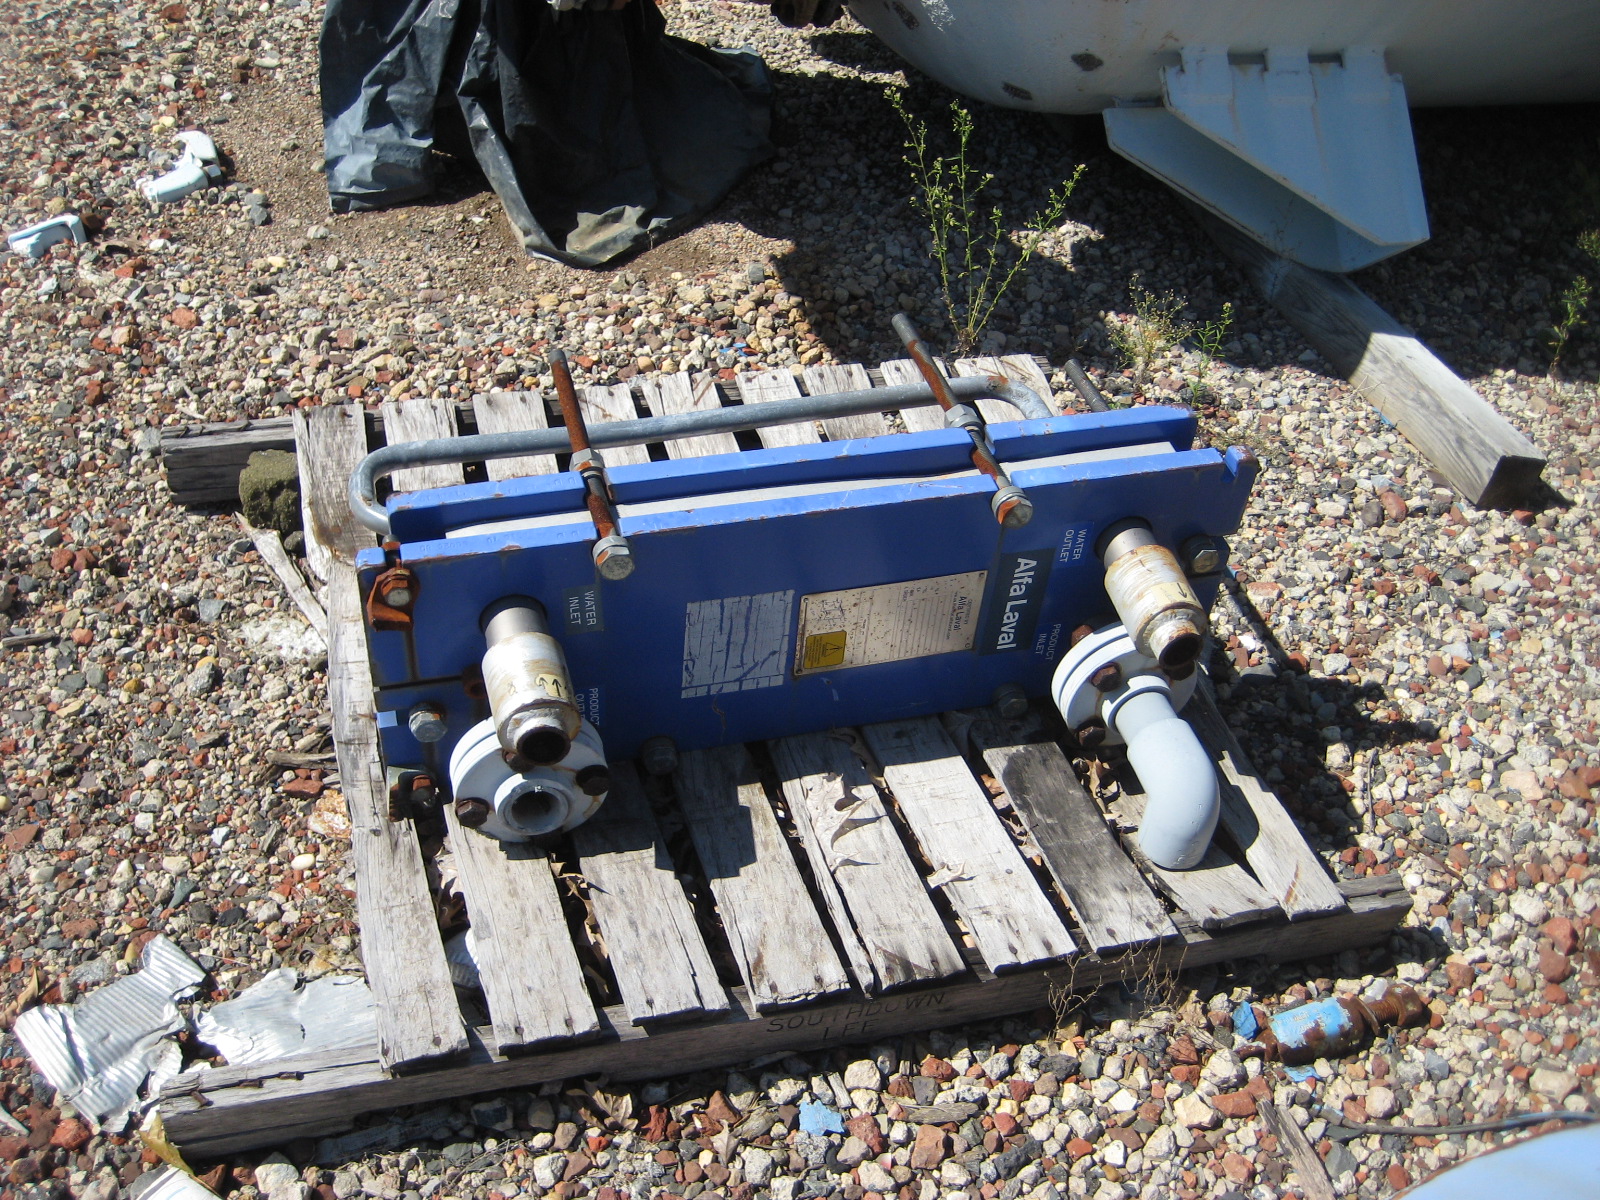 16 Sq. Ft. Alfa Laval Plate Heat Exchanger